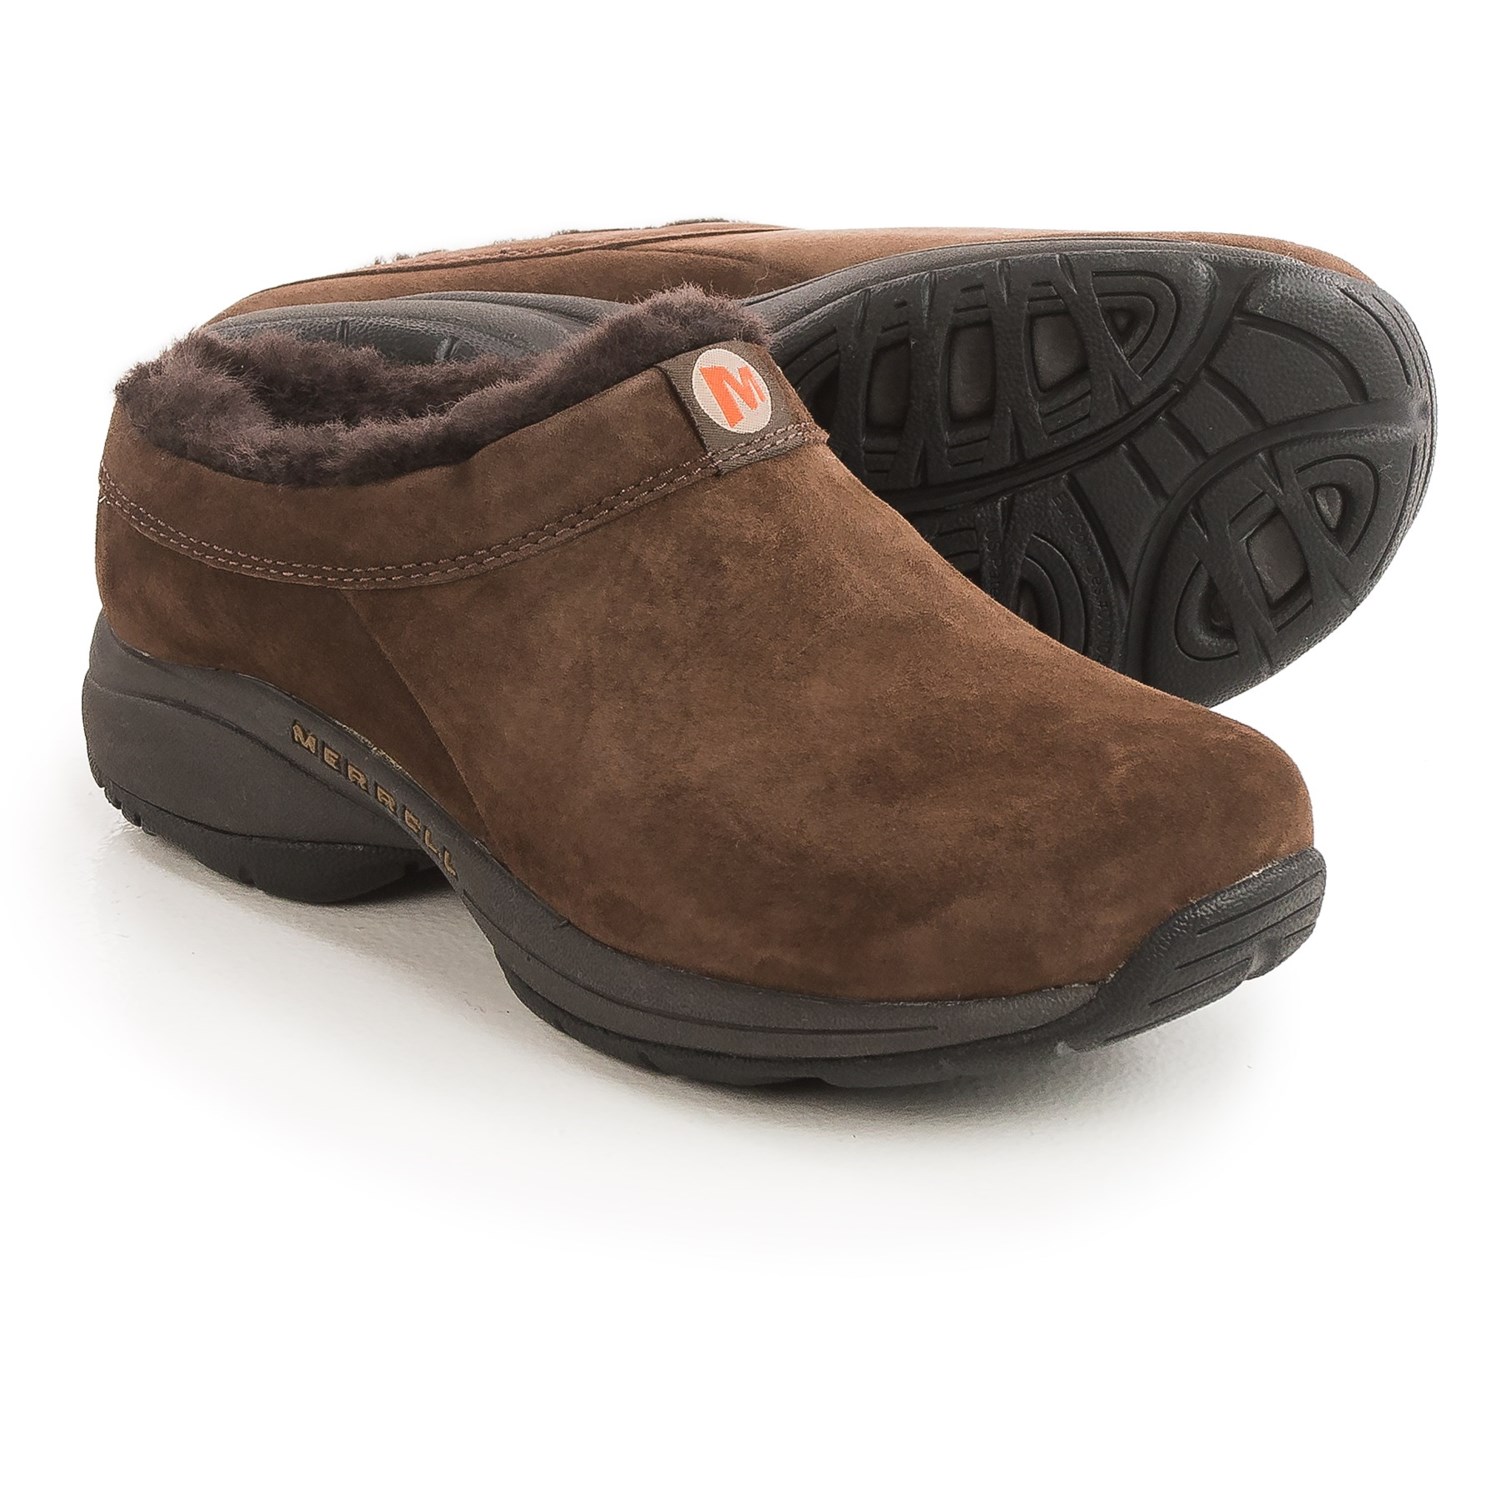 Merrell Primo Chill Slide Shoes (For Women) - Save 39%